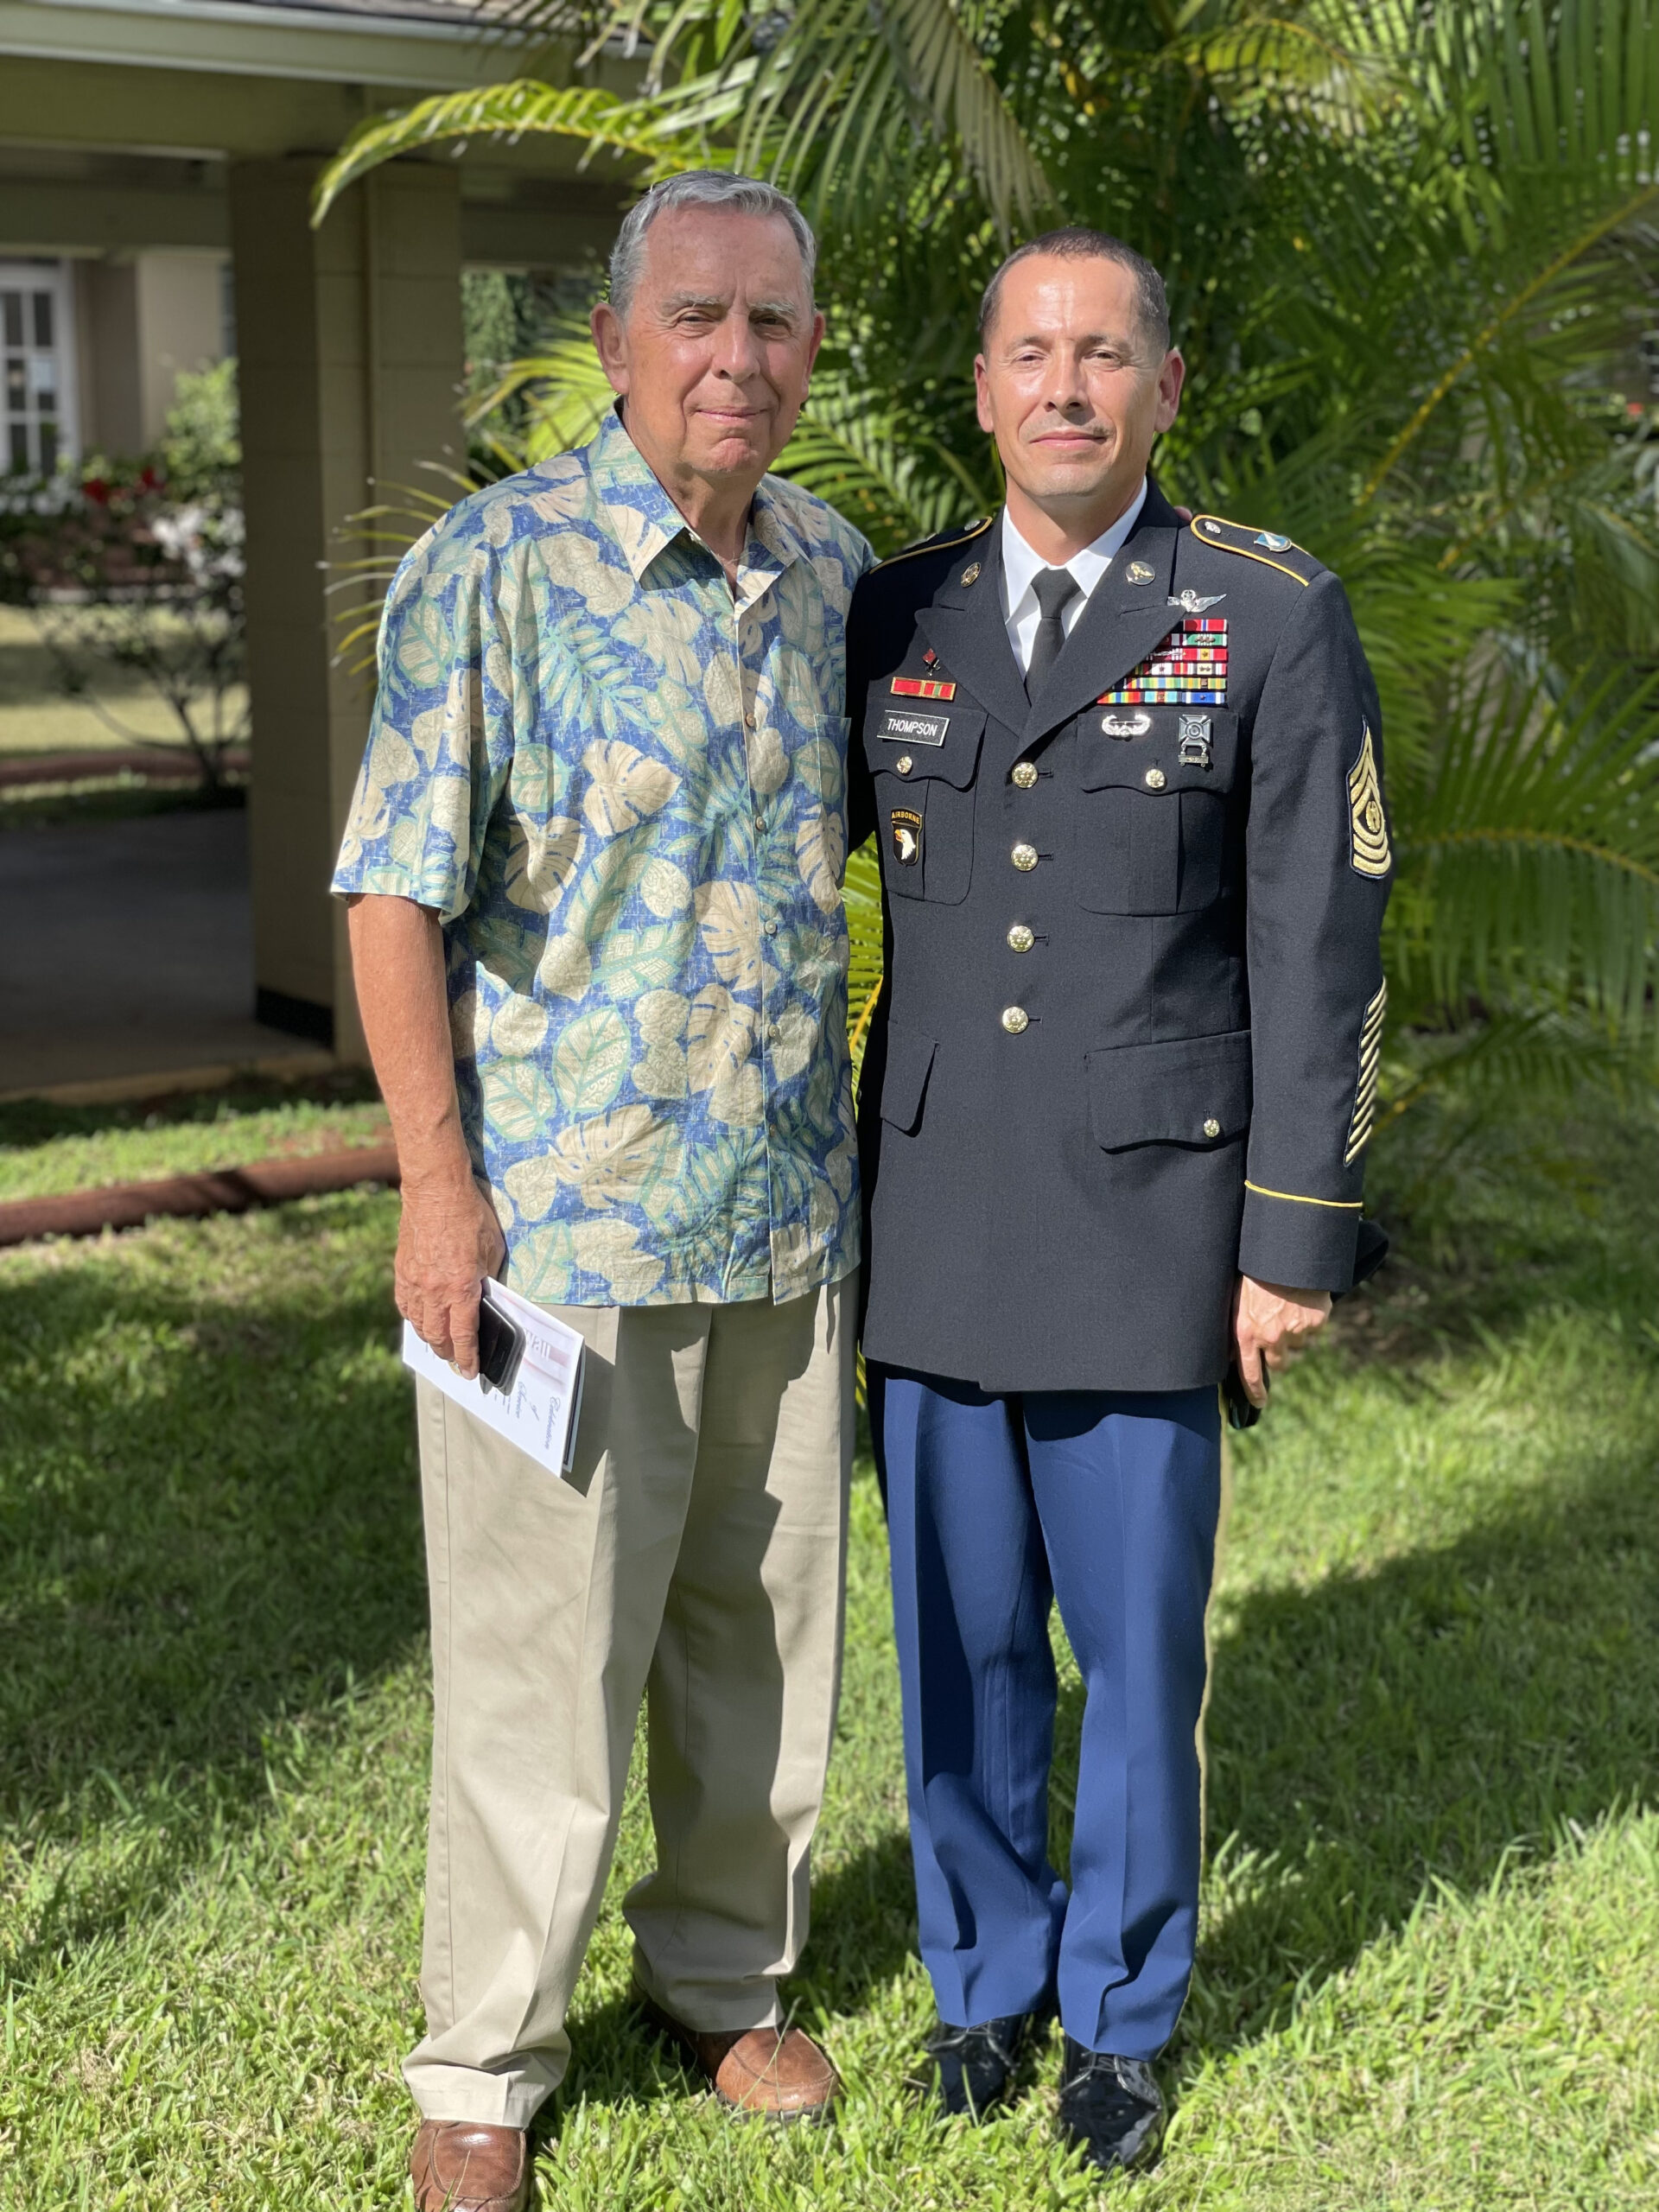 Father standing with his son who is in an Army uniform